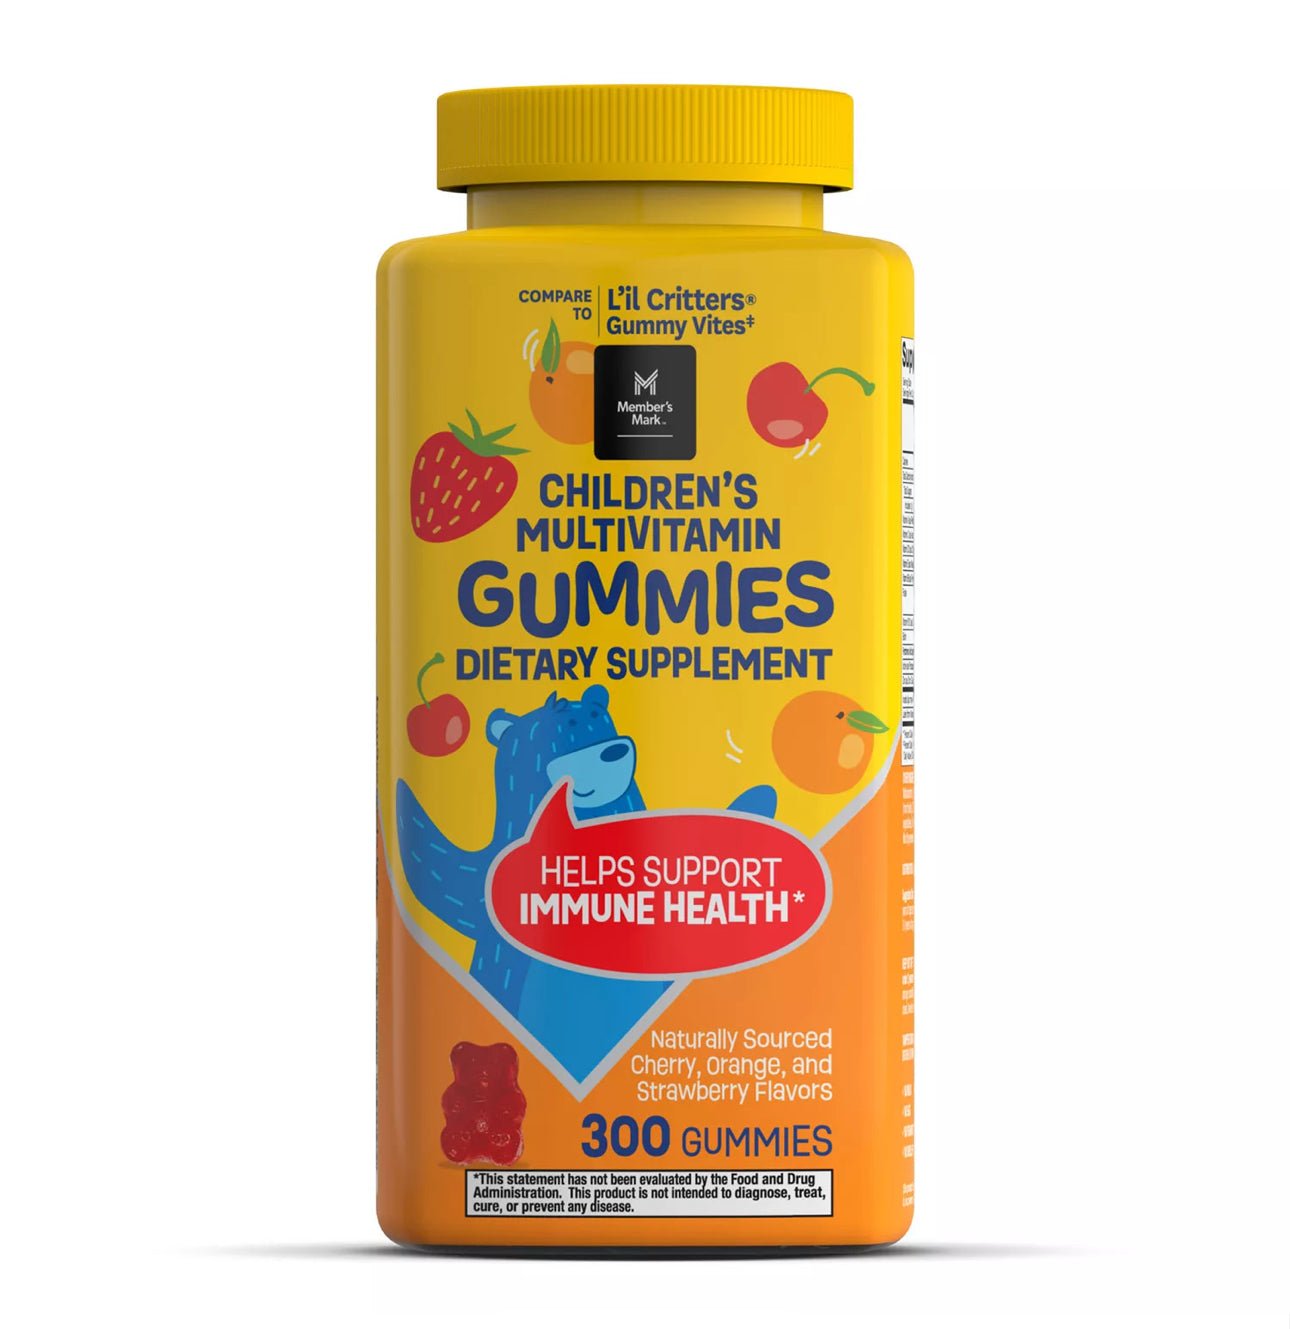 Member's Mark Children's Multivitamin Gummies | Assorted Fruit Flavors | Similar to Lil Critters | 300 gummies - Ome's Beauty Mart